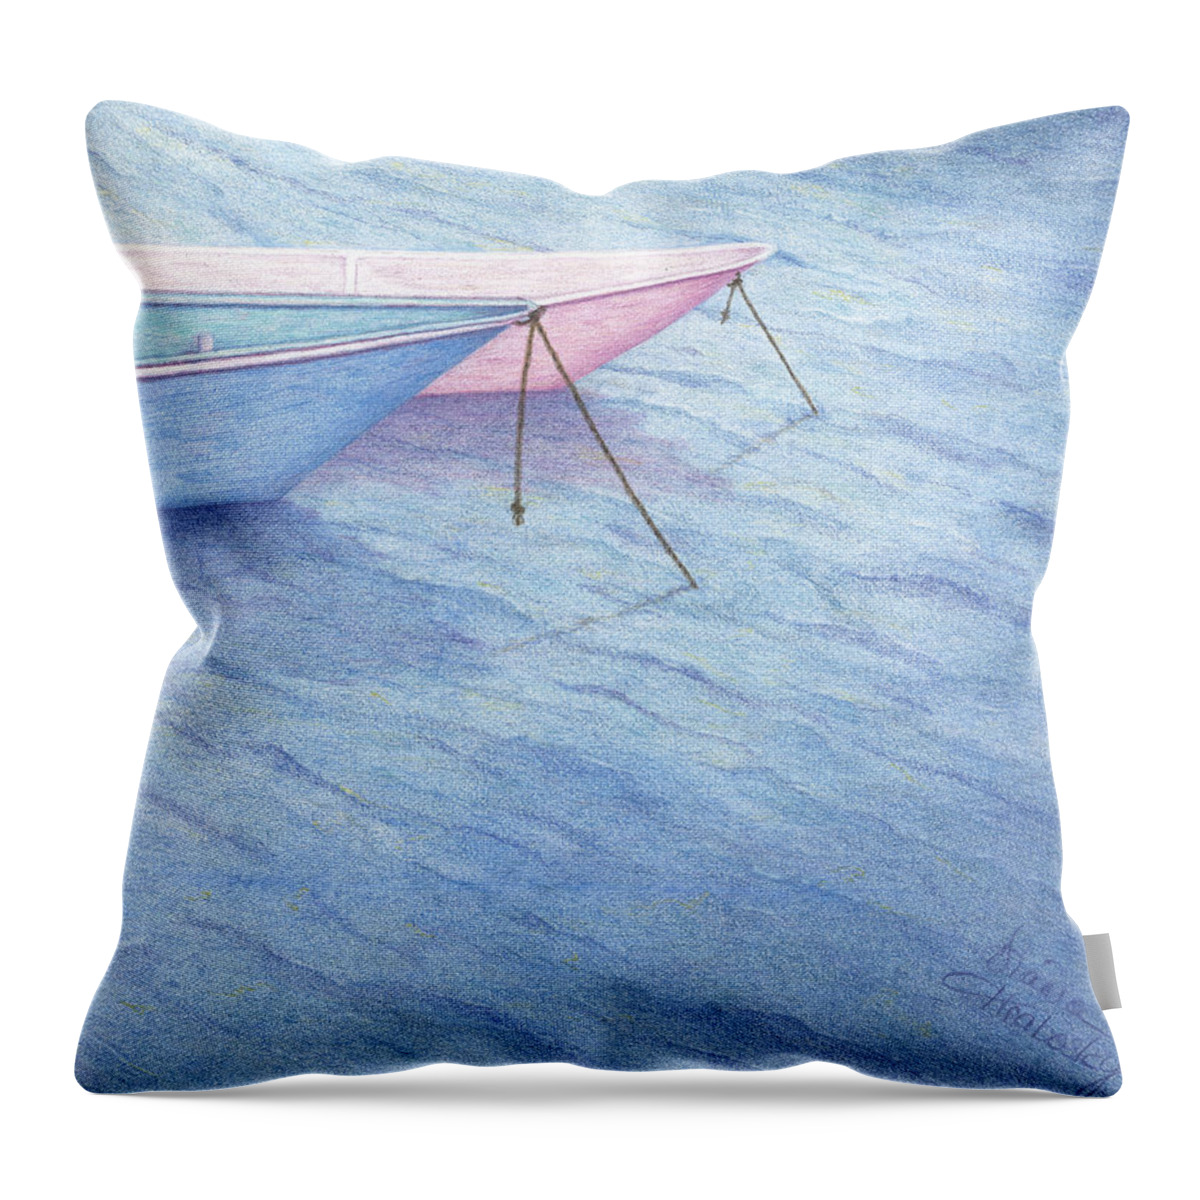 Boat Throw Pillow featuring the drawing Resting by Diana Hrabosky